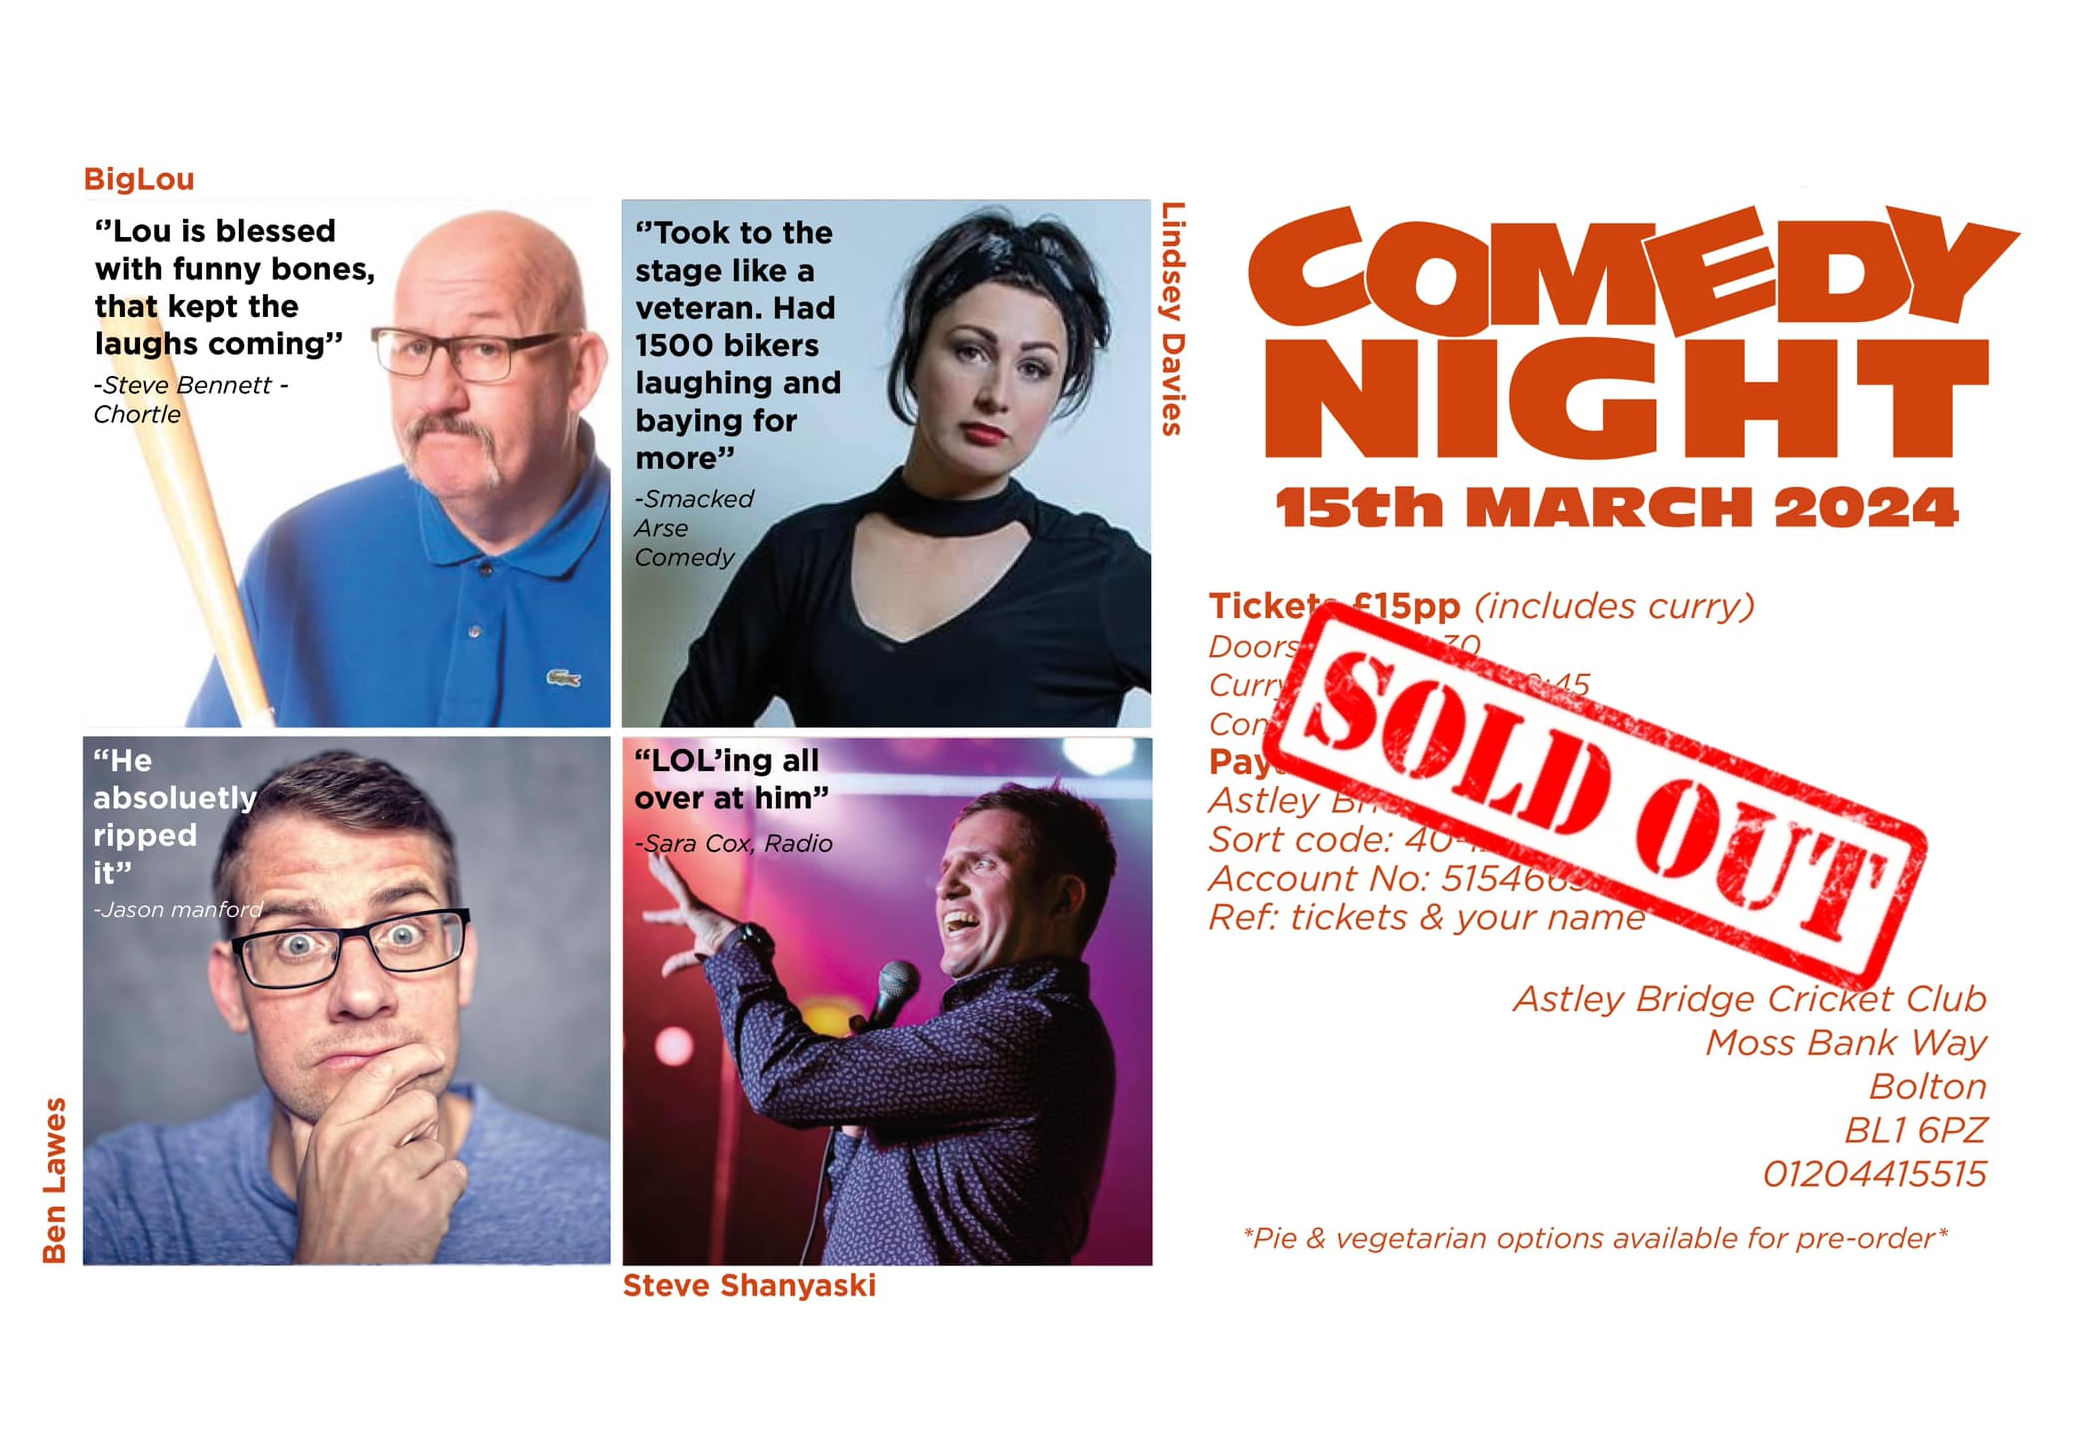 A Poster advertising a sold out Comedy Night at Astley Bridge Cricket Club on the 15th March 2024.